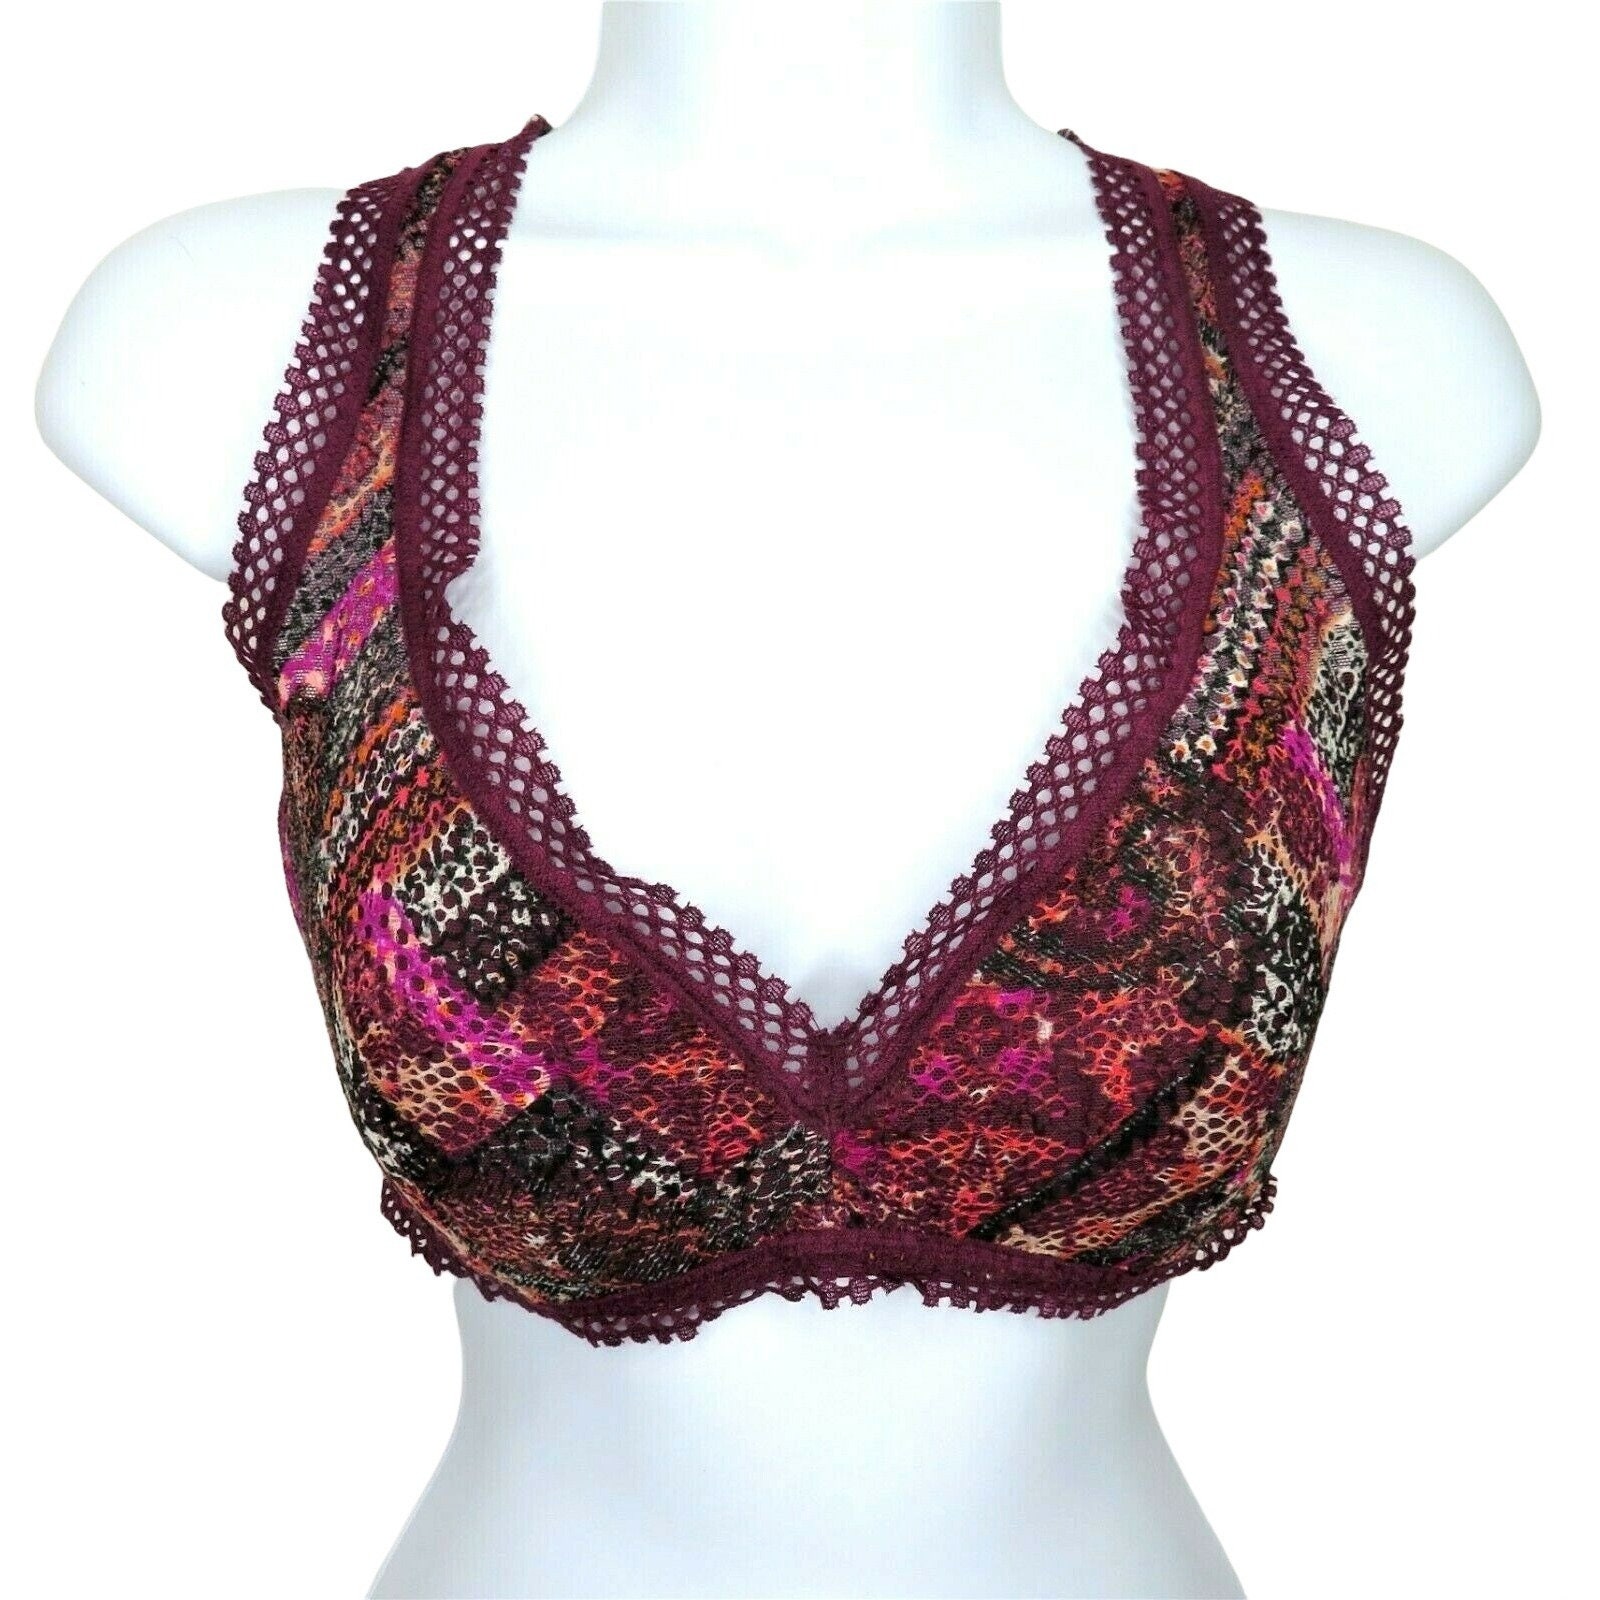 Victoria's Secret Halter Padded Lace Bra Burgundy Rn 54867 Sexy Low Plunge  LG Discontinued Vintage -  Canada